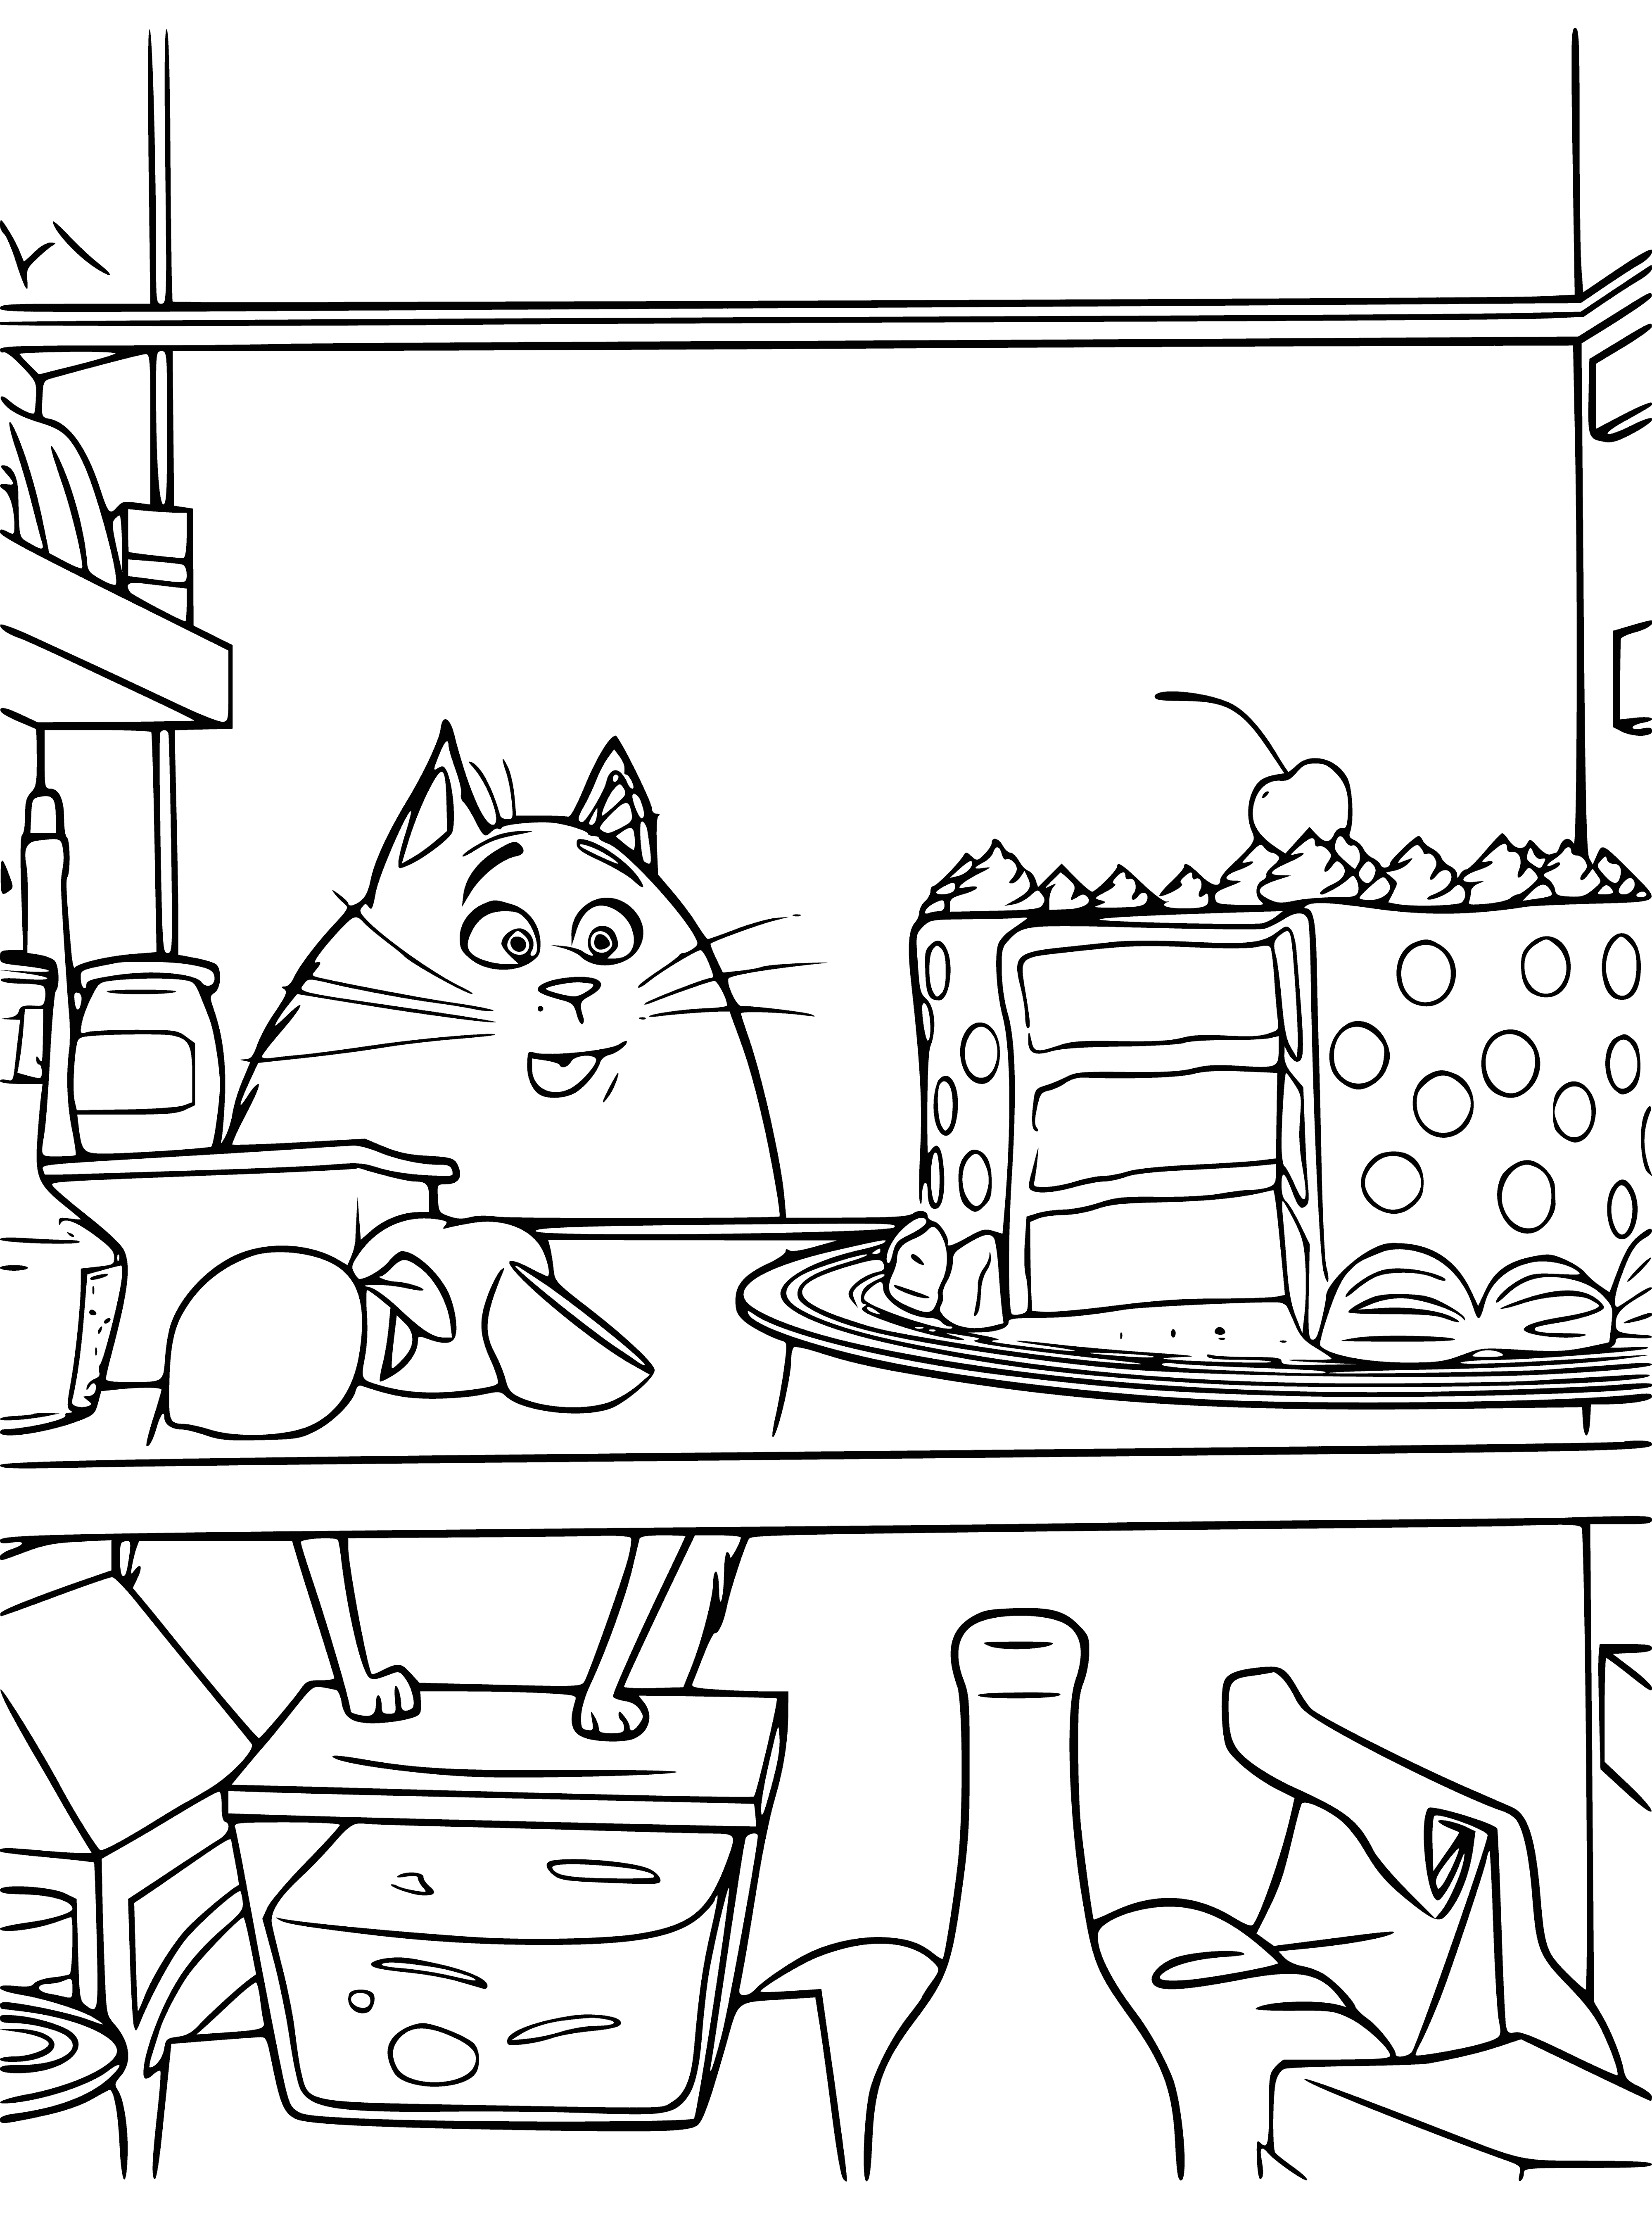 coloring page: Small white dog w/ black spots lying on red cushion; mouth open, sharp teeth, eyes closed. Round cake w/ two candles on ground next to it.